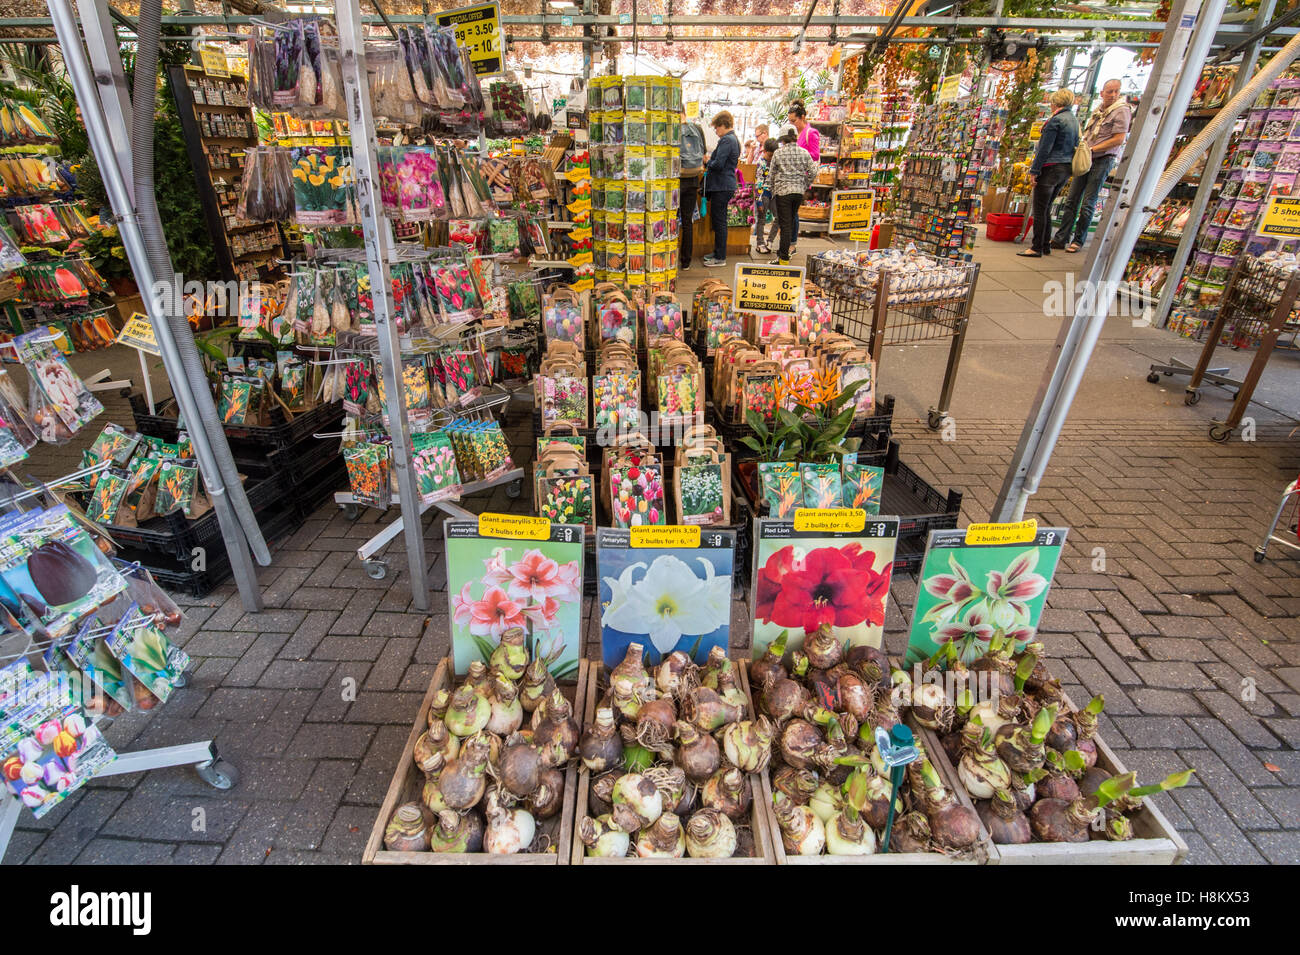 Amsterdam, Netherlands large array of flower bulbs and seeds for sale in an outdoor market. Stock Photo